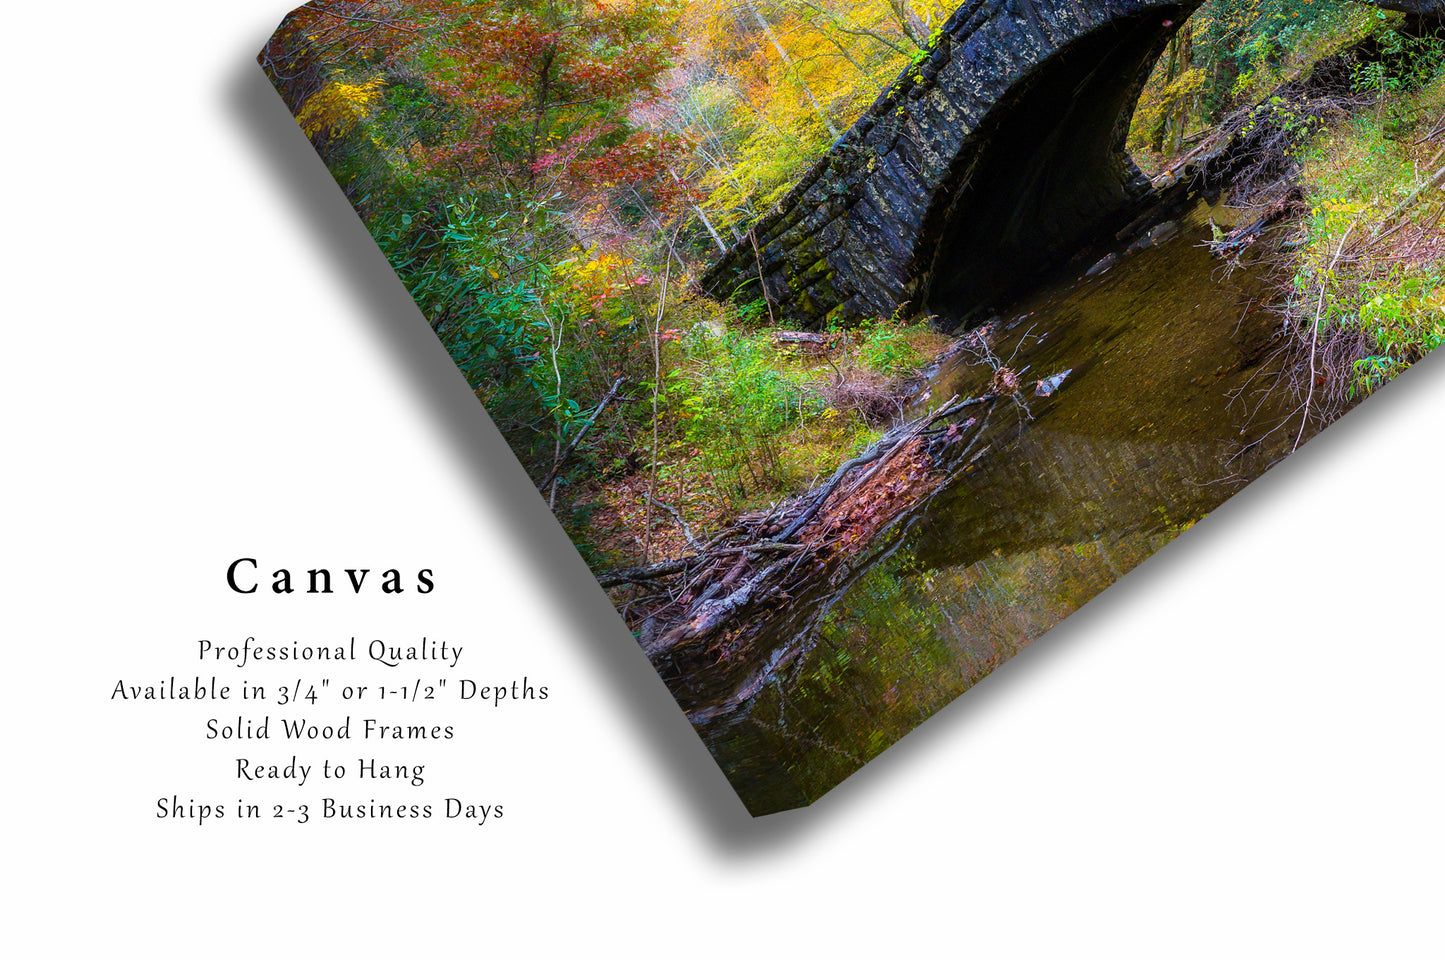 Country Canvas Wall Art - Gallery Wrap of Stone Bridge Surrounded by Fall Foliage in Great Smoky Mountains - Photography Artwork Photo Decor